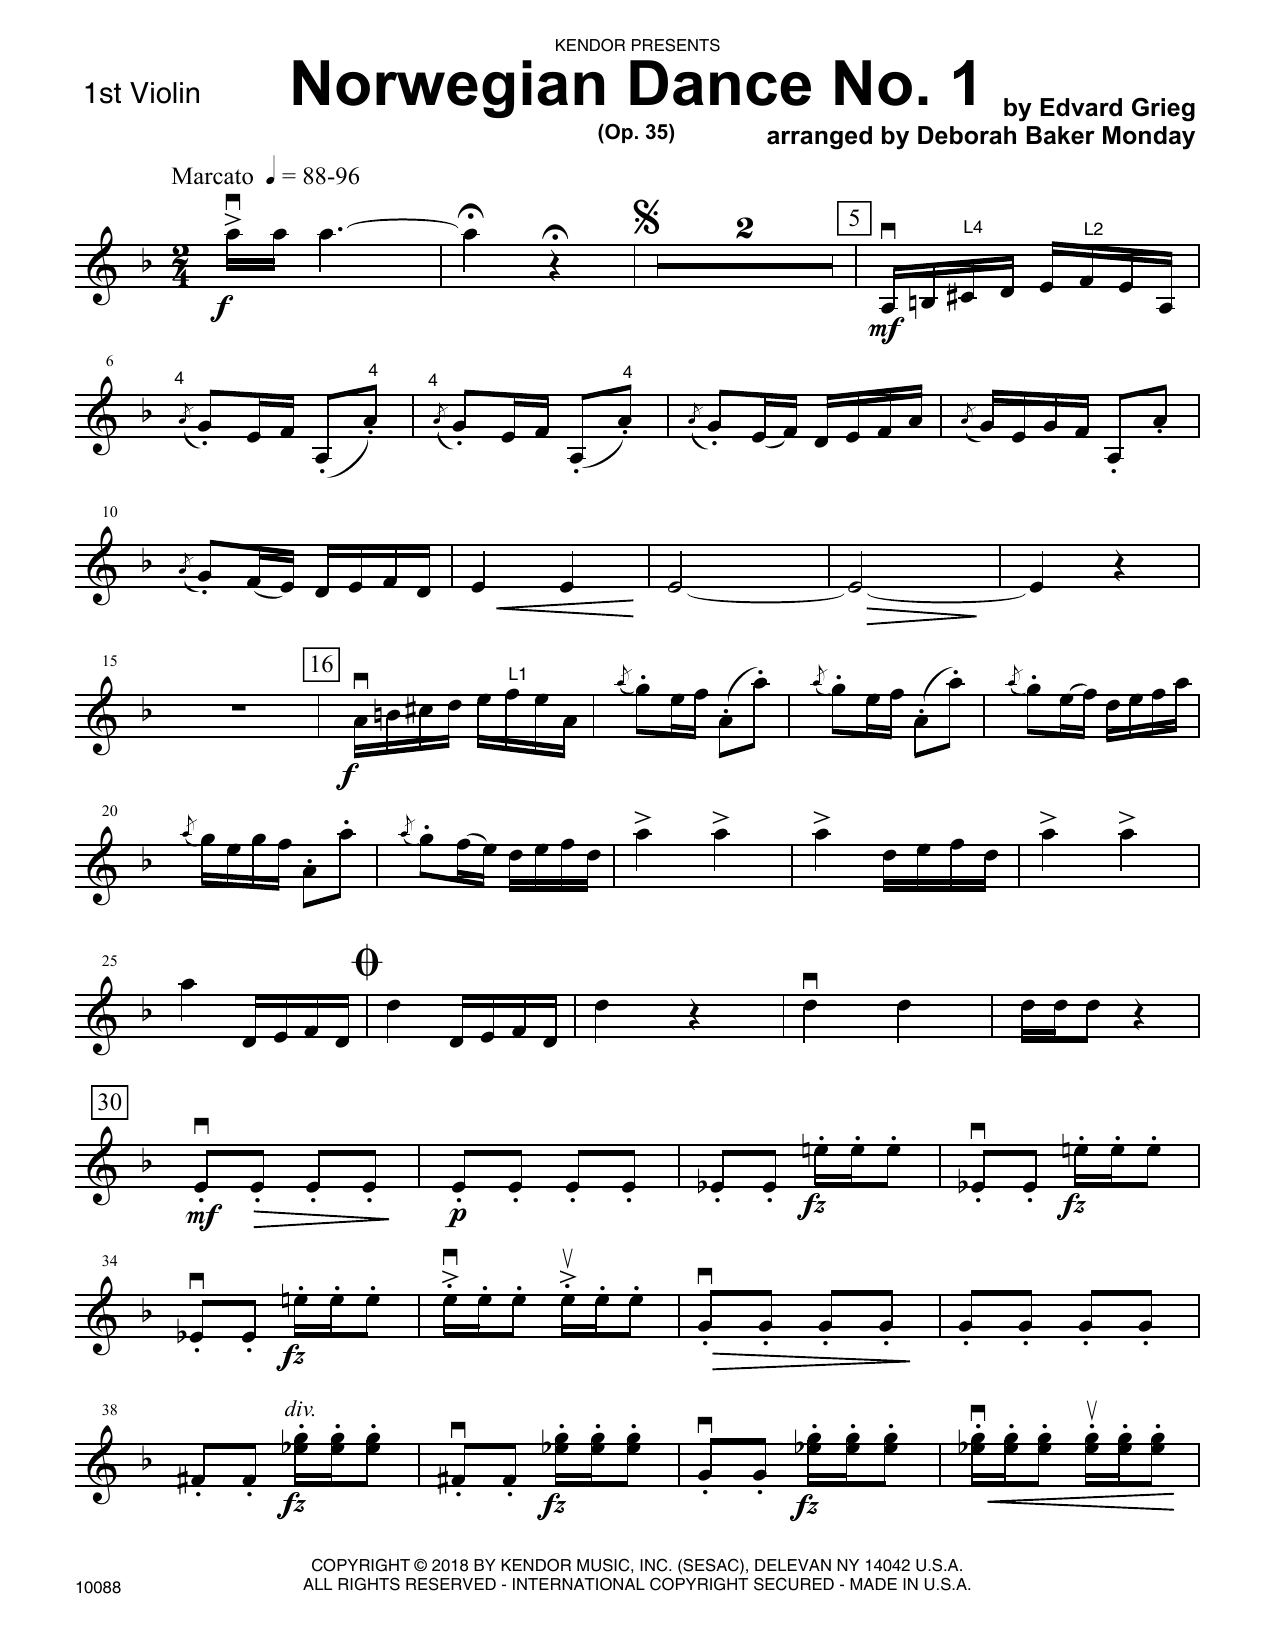 Deborah Baker Monday Norwegian Dance No. 1 (Op. 35) - 1st Violin sheet music preview music notes and score for Orchestra including 3 page(s)